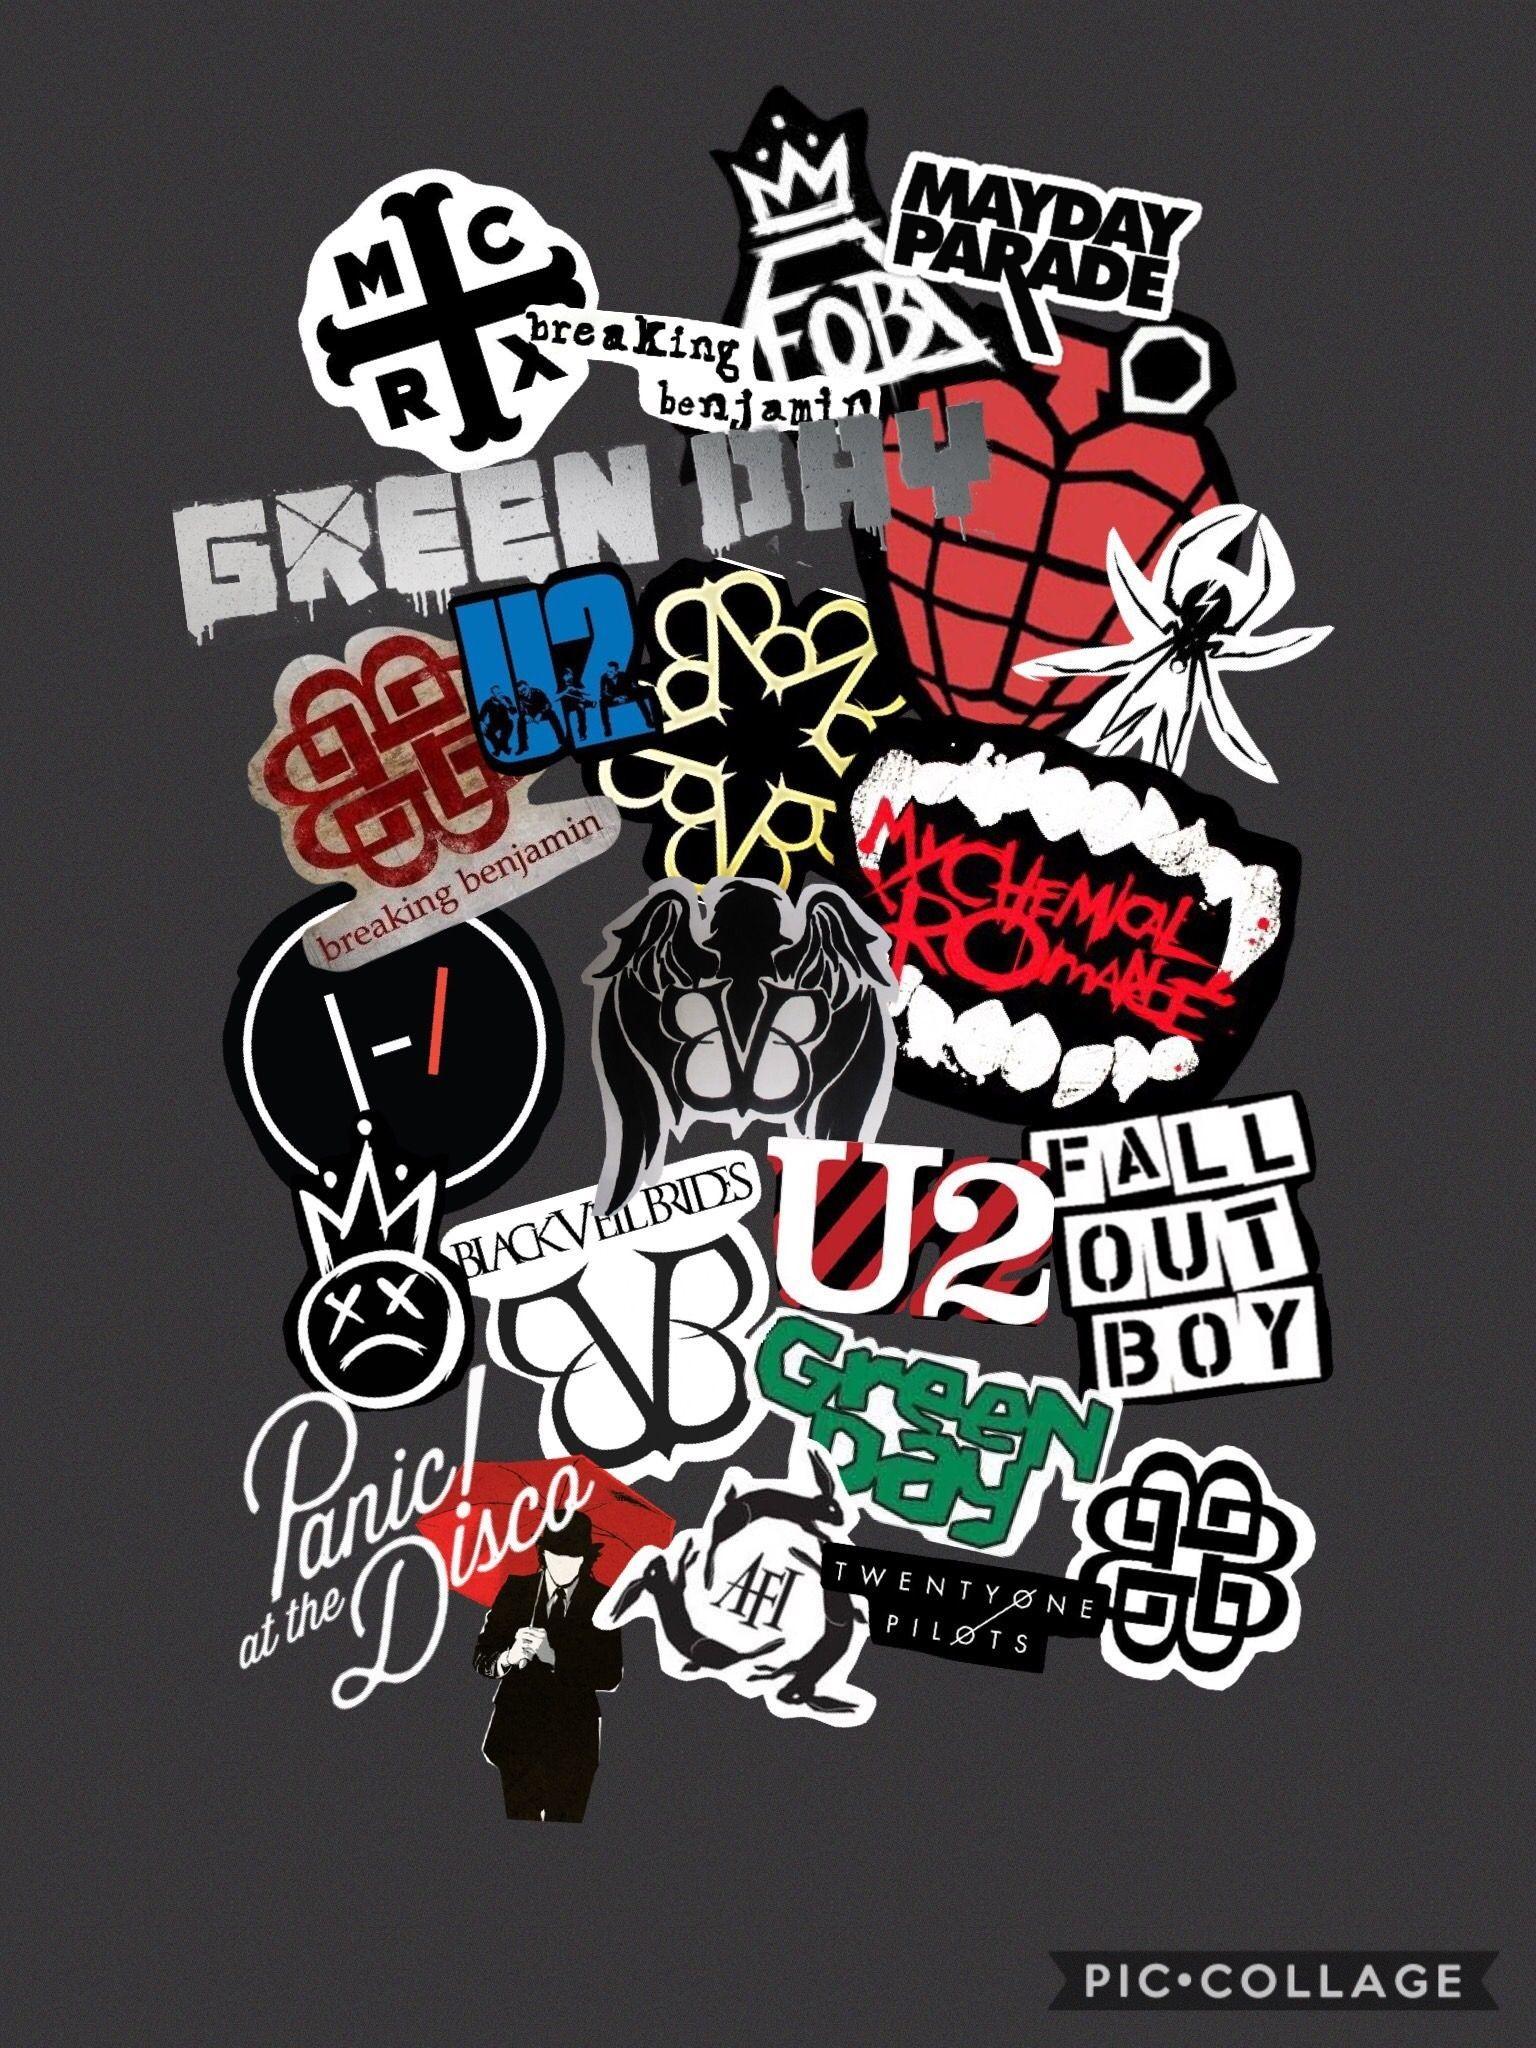 A large collection of stickers on the wall - 2000s, rock, punk